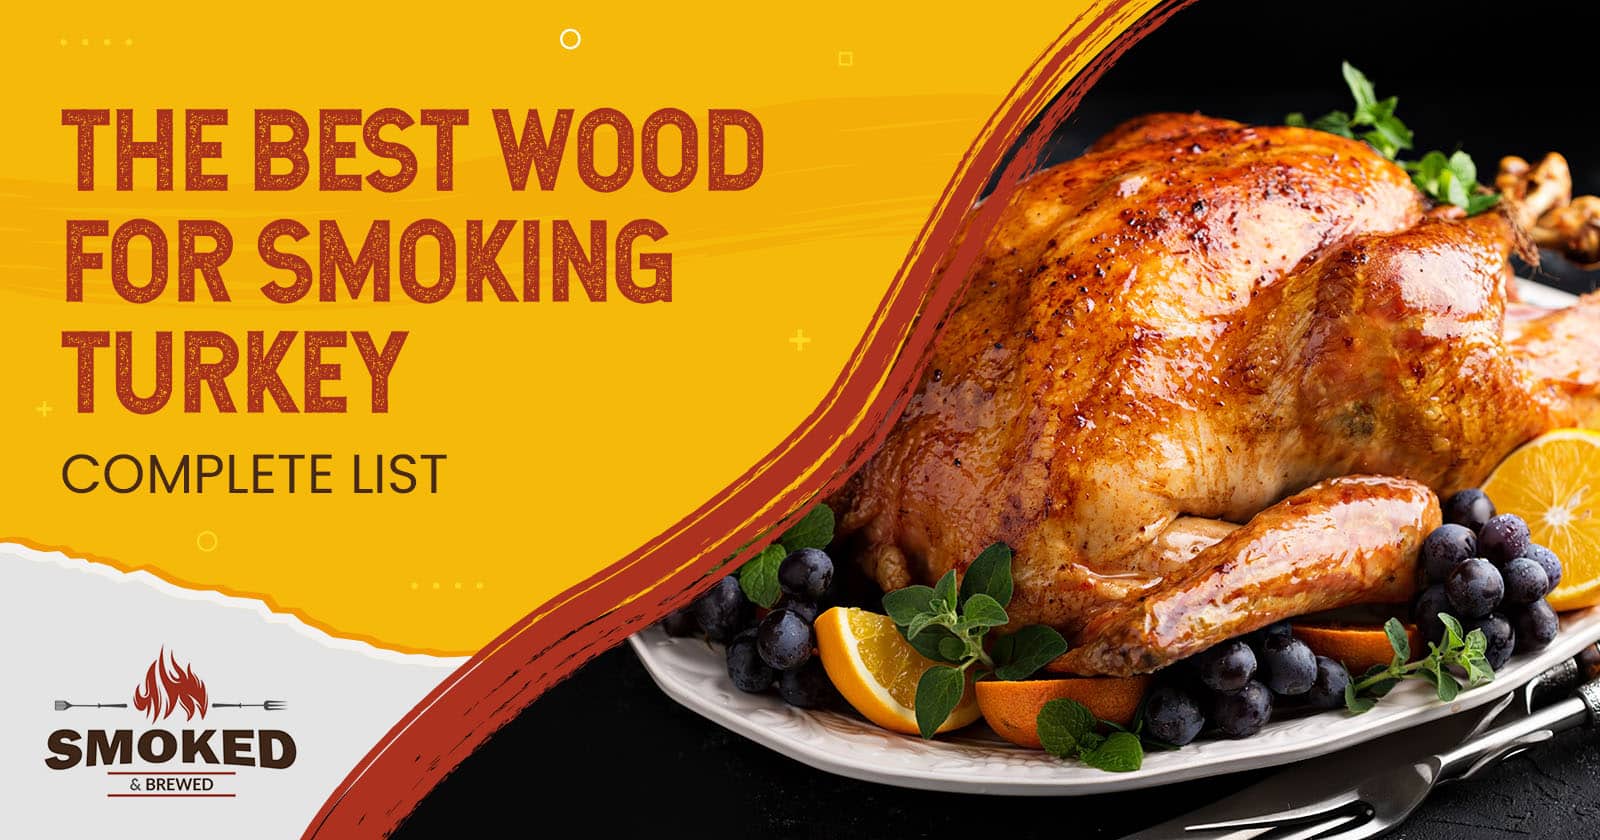 The Best Wood for Smoking Turkey [COMPLETE LIST]